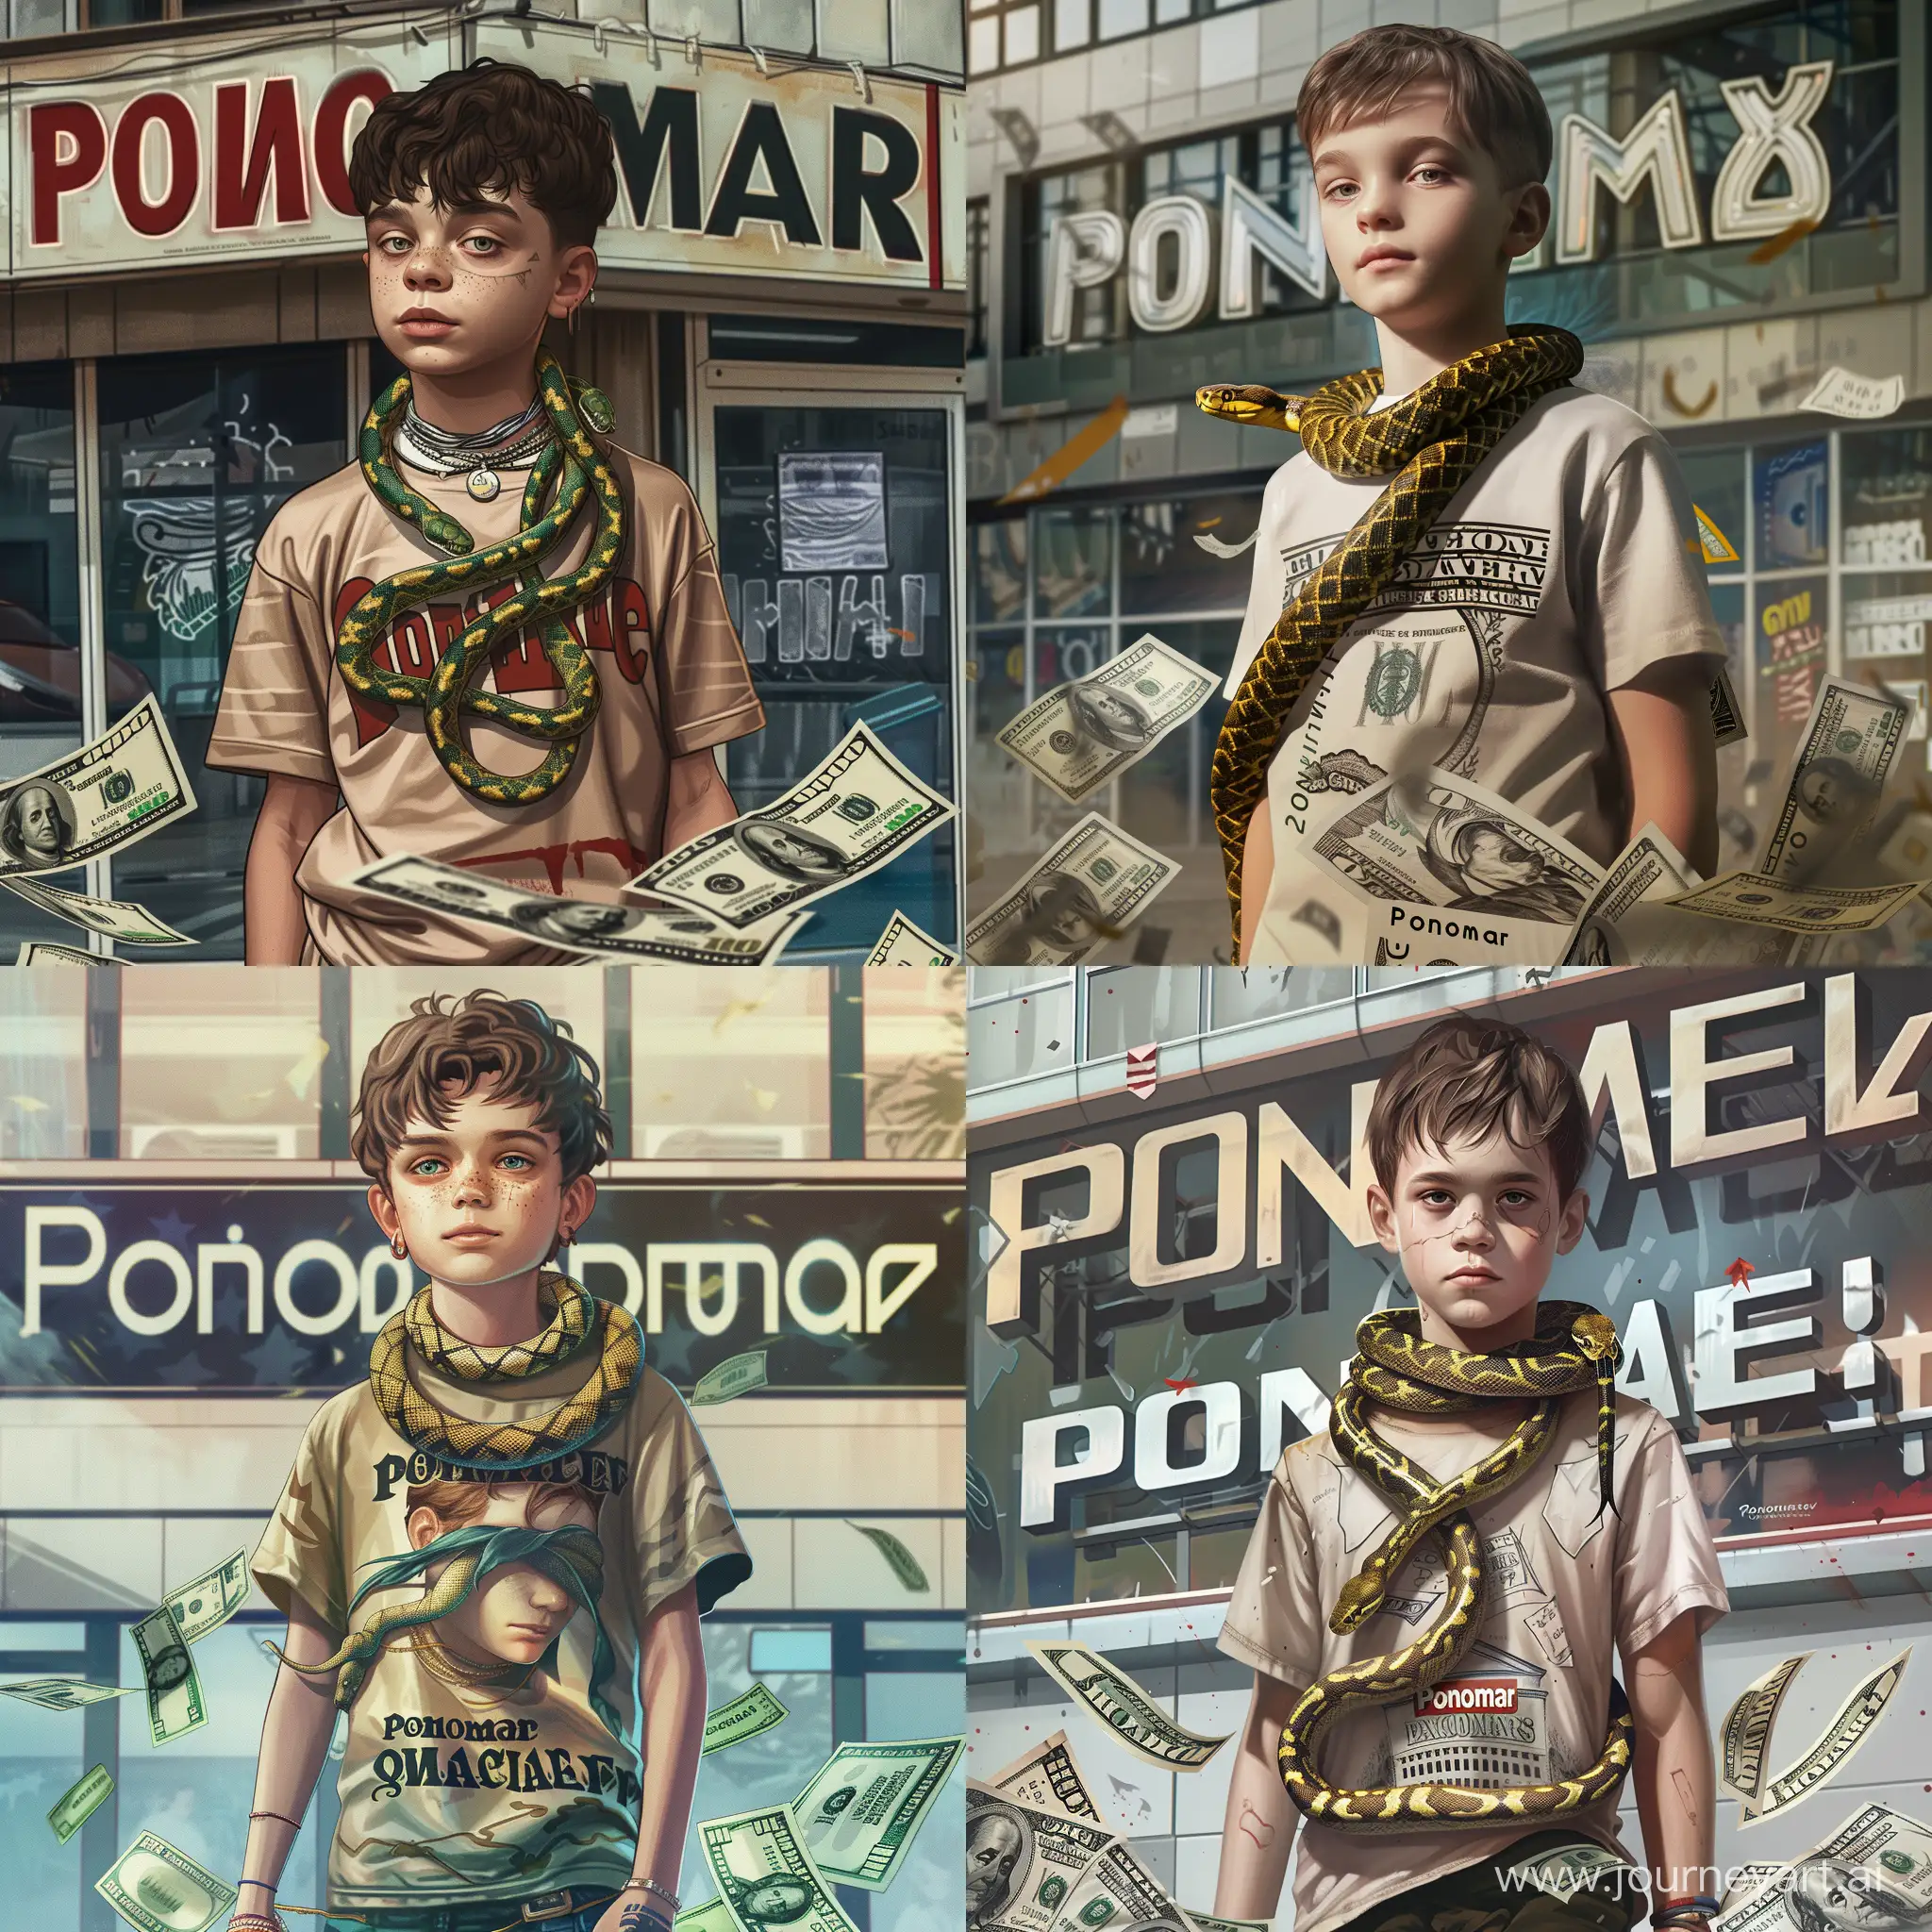 A teenage boy with a snake wrapped around his neck, standing against the backdrop of an IT building with a sign that reads 'Ponomarev'. There are dollar bills scattered around him. He's wearing a T-shirt with the text “Ponomar“